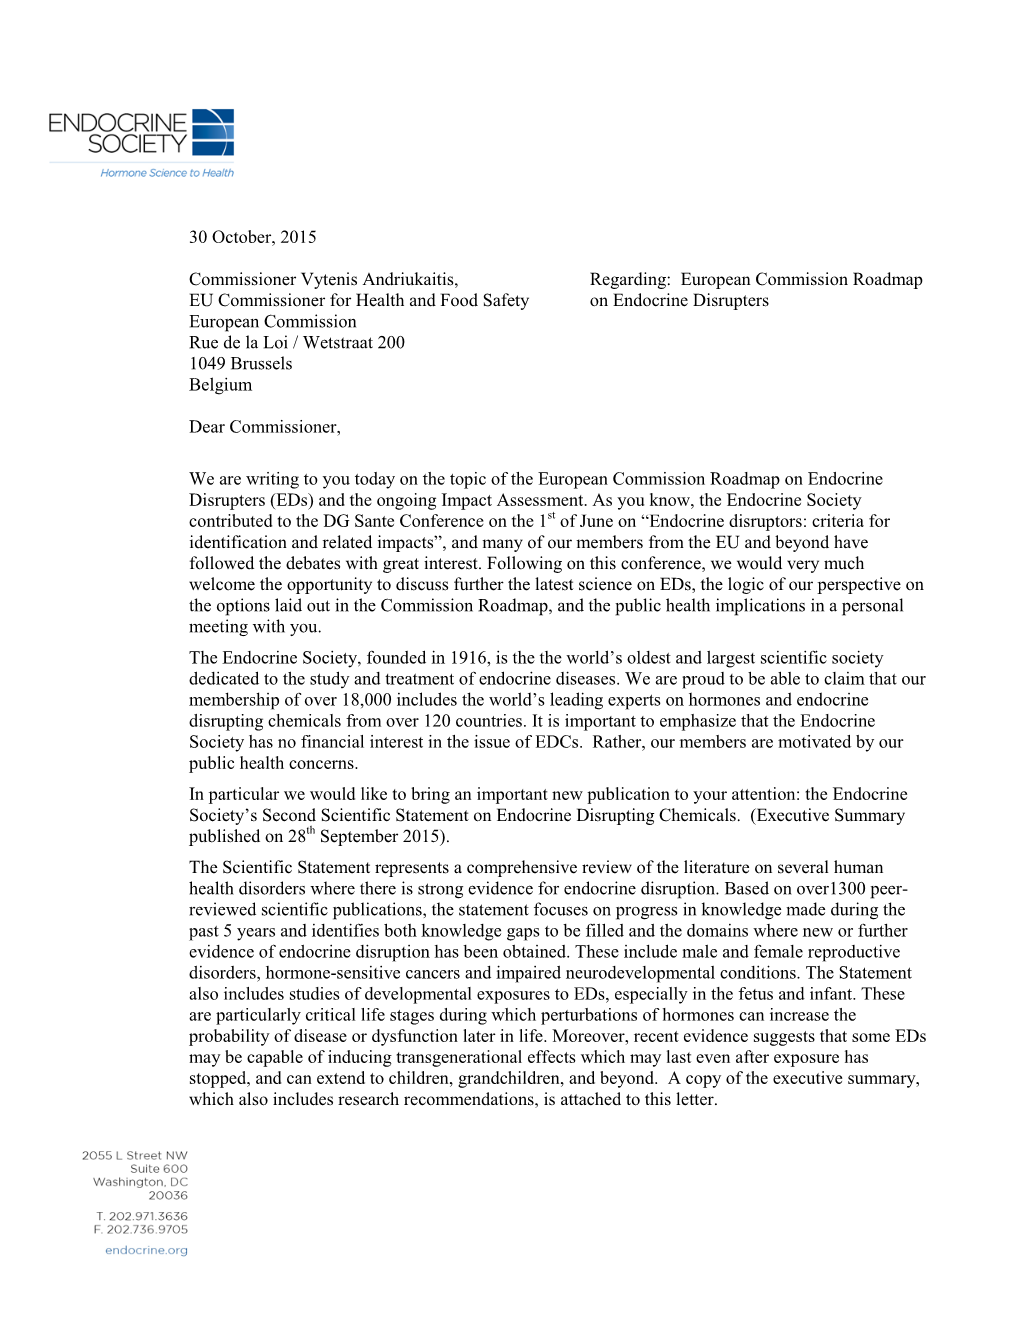 Endocrine Society Letter to Commissioner Vytenis Andriukaitis